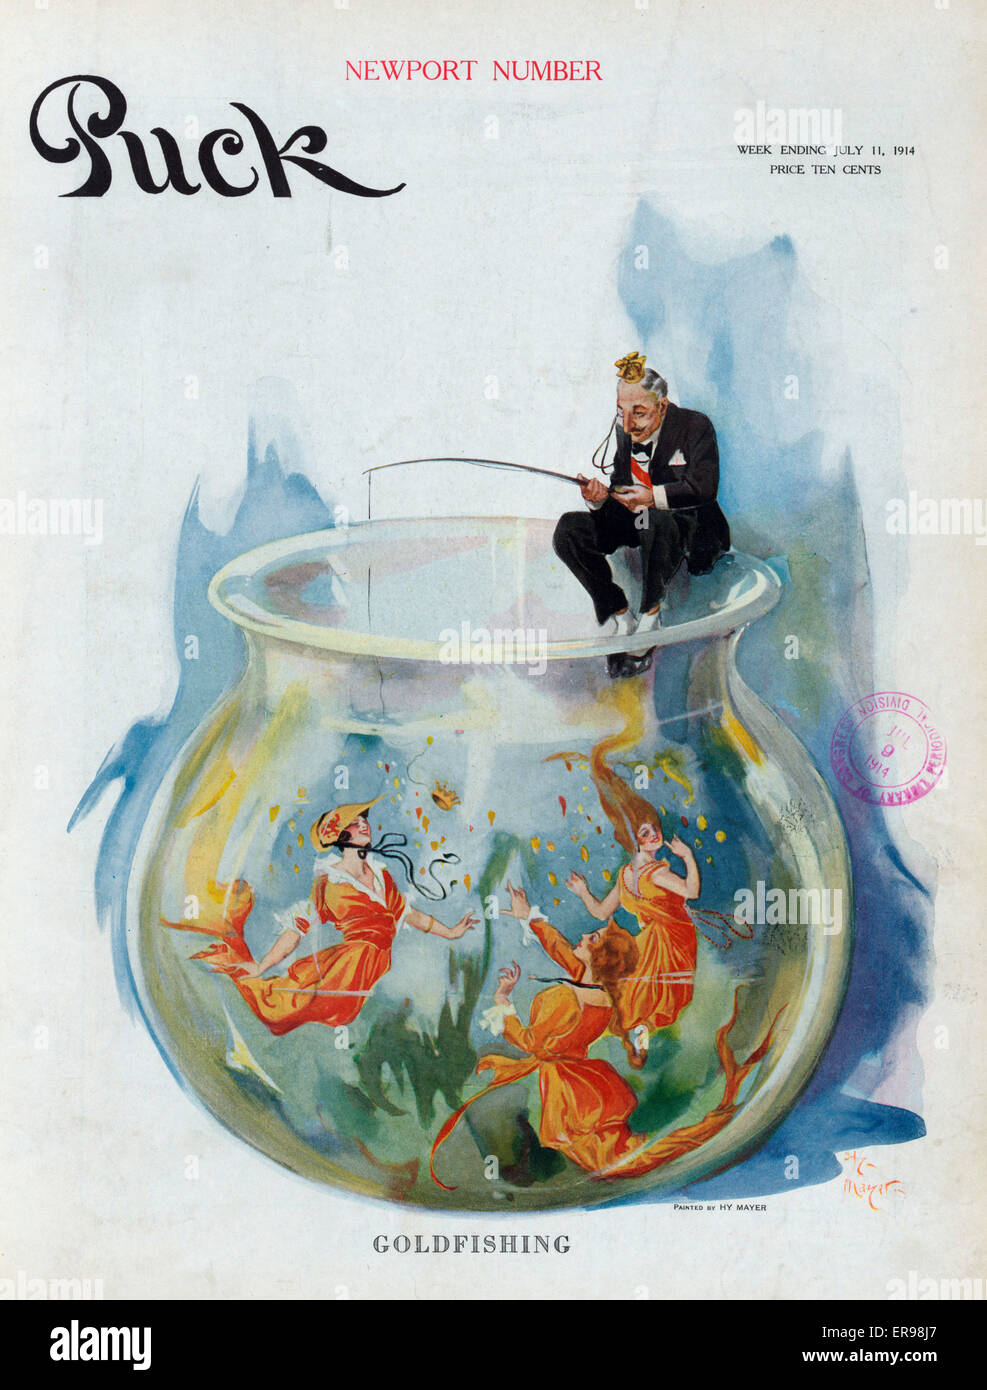 Goldfishing. Illustration shows a well dressed man with a crown on his head, sitting on the edge of a fishbowl dangling a crown from a fishing pole among three beautiful young woman as goldfish. Date 1914 July 11. Stock Photo